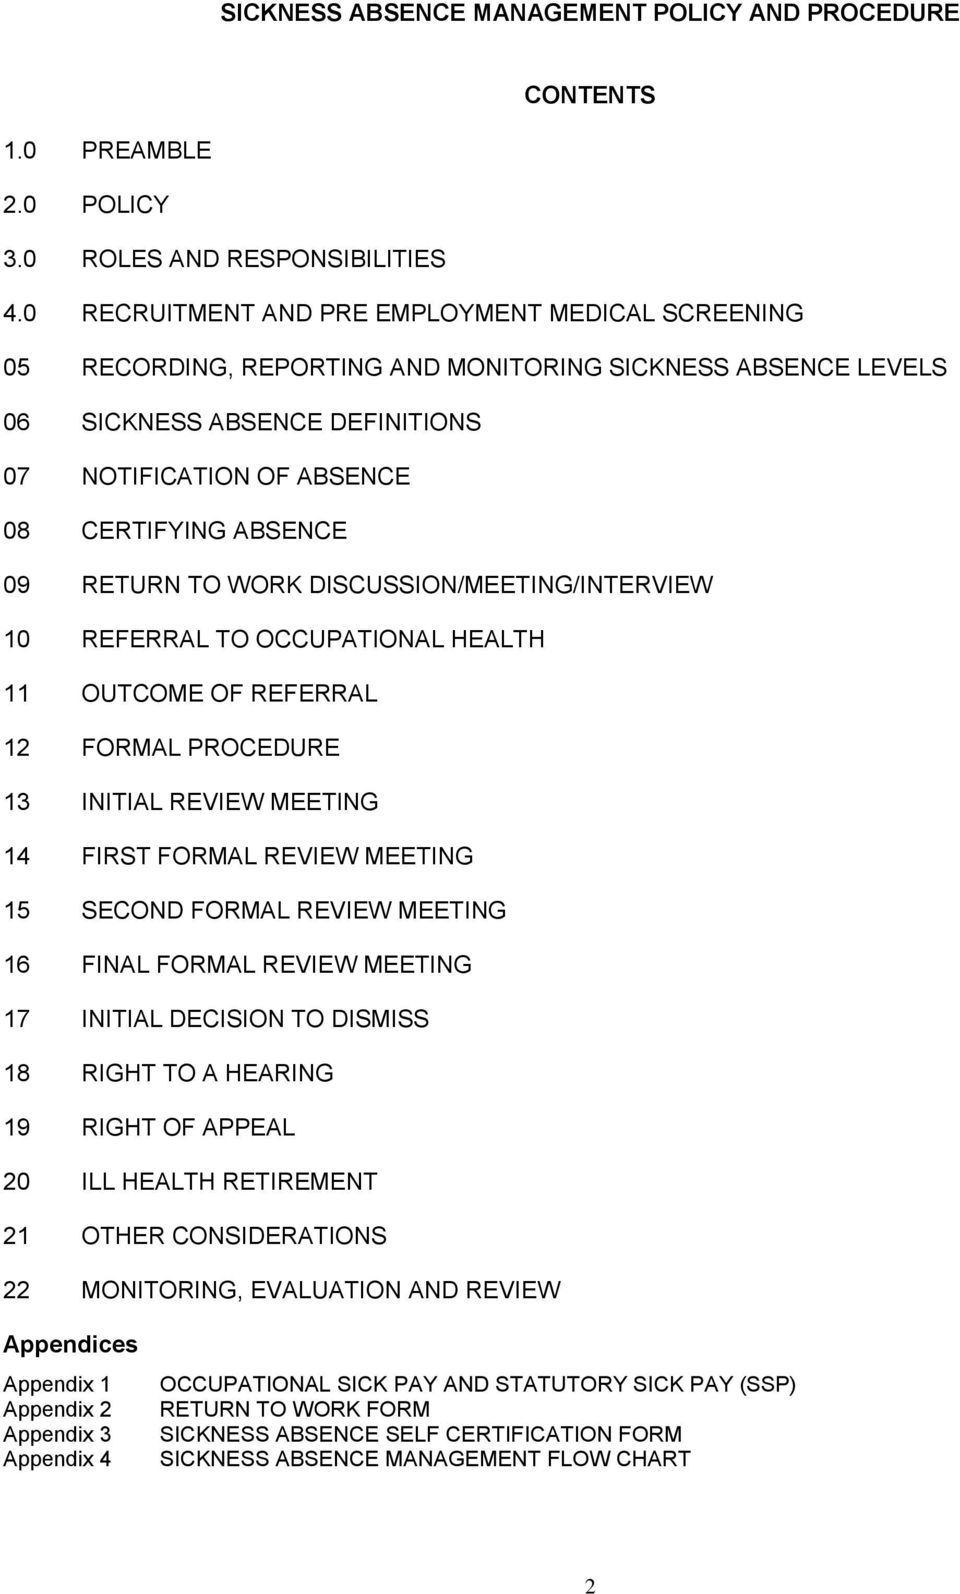 RETURN TO WORK DISCUSSION/MEETING/INTERVIEW 10 REFERRAL TO OCCUPATIONAL HEALTH 11 OUTCOME OF REFERRAL 12 FORMAL PROCEDURE 13 INITIAL REVIEW MEETING 14 FIRST FORMAL REVIEW MEETING 15 SECOND FORMAL